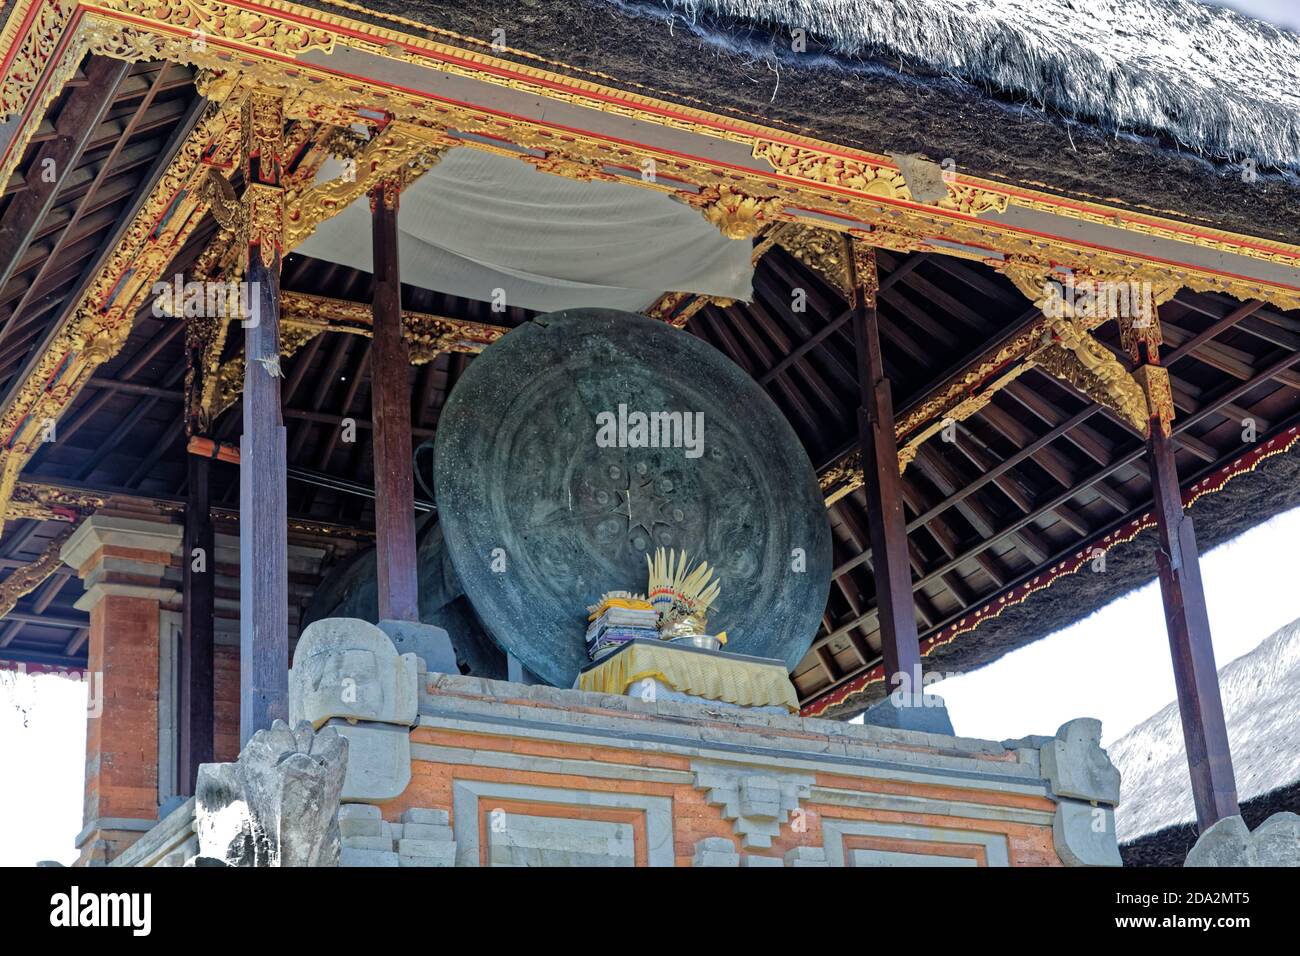 Pejeng, Bali, Indonesia. 24th May, 2019. Pavilion which houses the Moon of Pejeng (nekara), bronze gong 1.86 m high and 1.62 m in diameter. Stock Photo